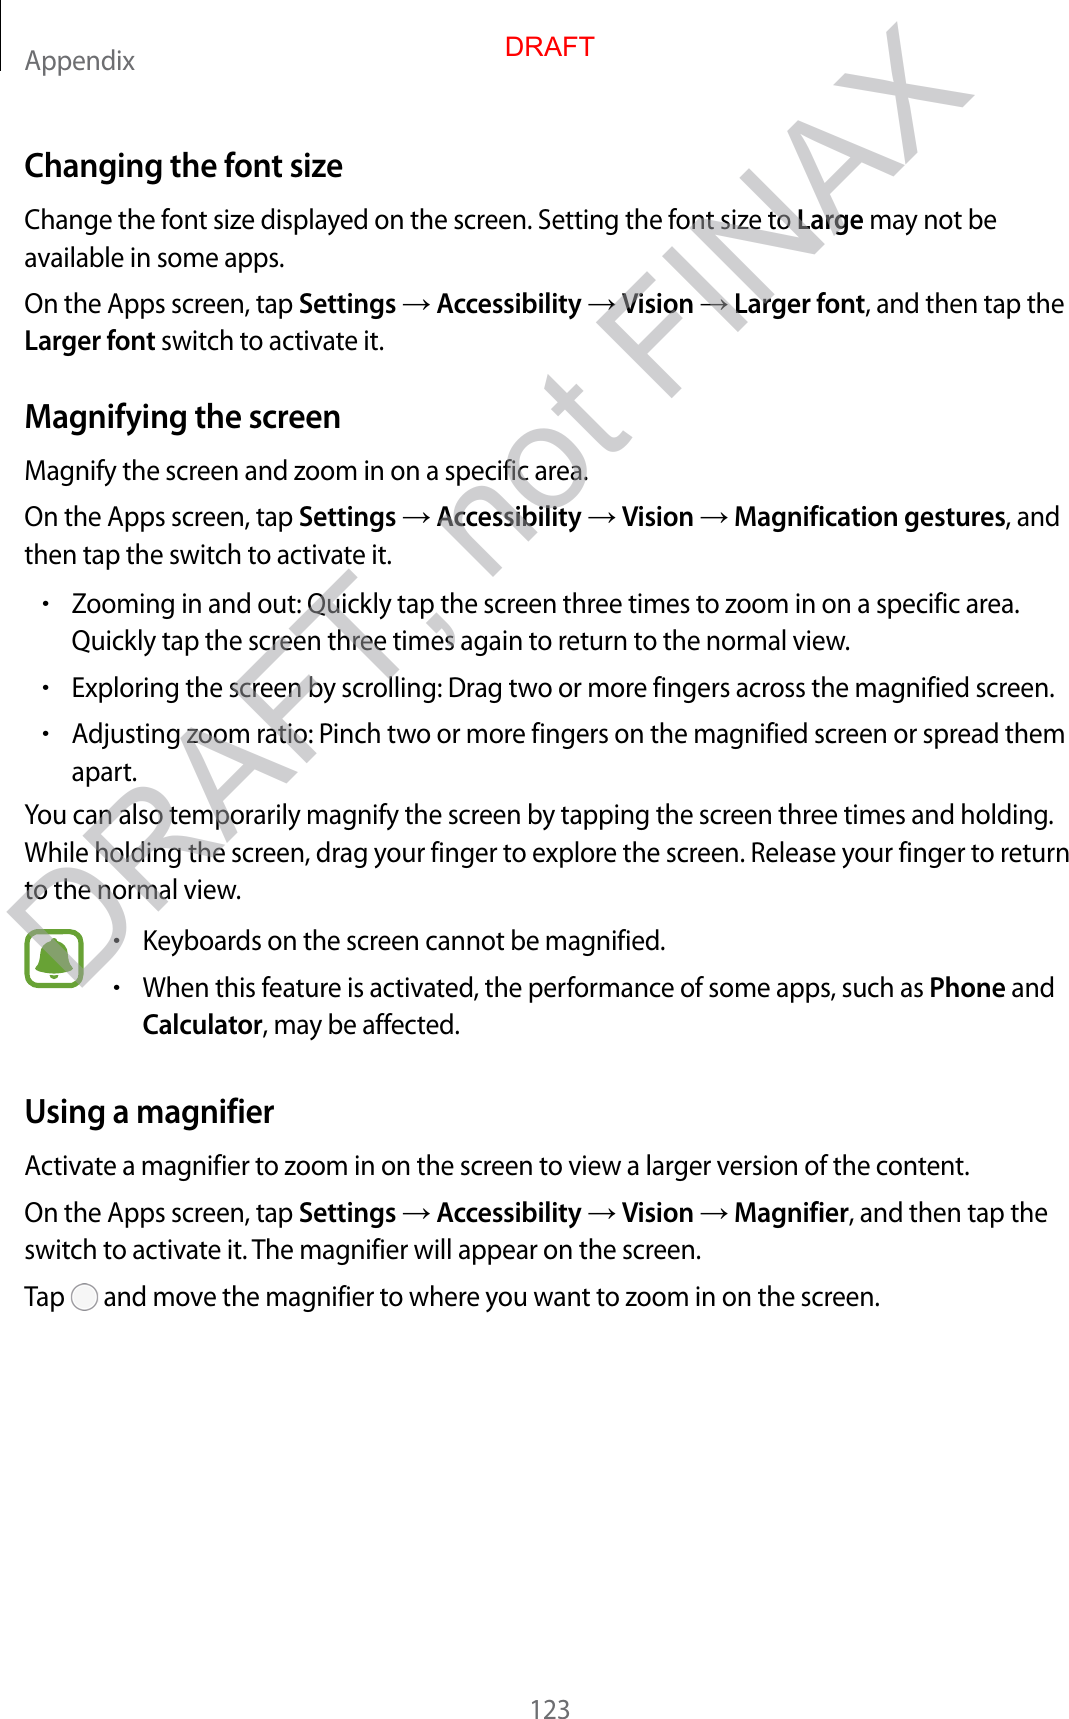 Appendix123Changing the font sizeChange the font size displayed on the screen. Setting the font size to Large may not be available in some apps.On the Apps screen, tap Settings  Accessibility  Vision  Larger font, and then tap the Larger font switch to activate it.Magnifying the screenMagnify the screen and zoom in on a specific area.On the Apps screen, tap Settings  Accessibility  Vision  Magnification gestures, and then tap the switch to activate it.•Zooming in and out: Quickly tap the screen three times to zoom in on a specific area. Quickly tap the screen three times again to return to the normal view.•Exploring the screen by scrolling: Drag two or more fingers across the magnified screen.•Adjusting zoom ratio: Pinch two or more fingers on the magnified screen or spread them apart.You can also temporarily magnify the screen by tapping the screen three times and holding. While holding the screen, drag your finger to explore the screen. Release your finger to return to the normal view.•Keyboards on the screen cannot be magnified.•When this feature is activated, the performance of some apps, such as Phone and Calculator, may be affected.Using a magnifierActivate a magnifier to zoom in on the screen to view a larger version of the content.On the Apps screen, tap Settings  Accessibility  Vision  Magnifier, and then tap the switch to activate it. The magnifier will appear on the screen.Tap   and move the magnifier to where you want to zoom in on the screen.DRAFTDRAFT, not FINAX